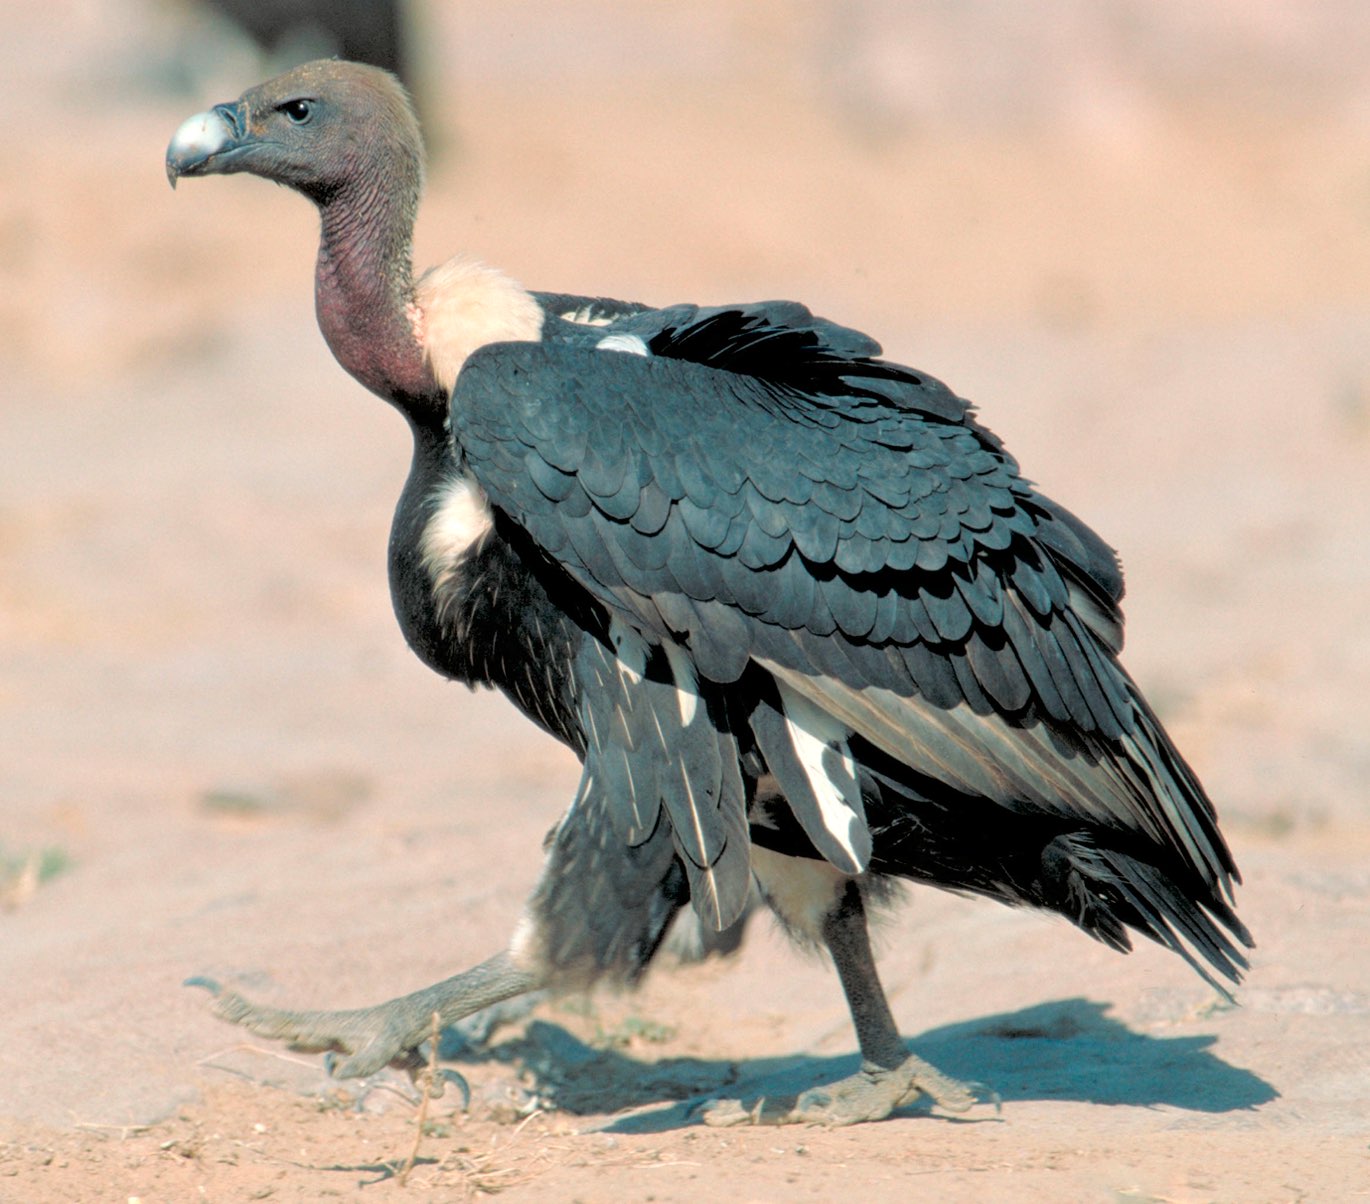 Oriental white-backed vultures have suffered catastrophic declines in India. Photo by Goran Ekstrom, Wikimedia Commons, CC by 2.5